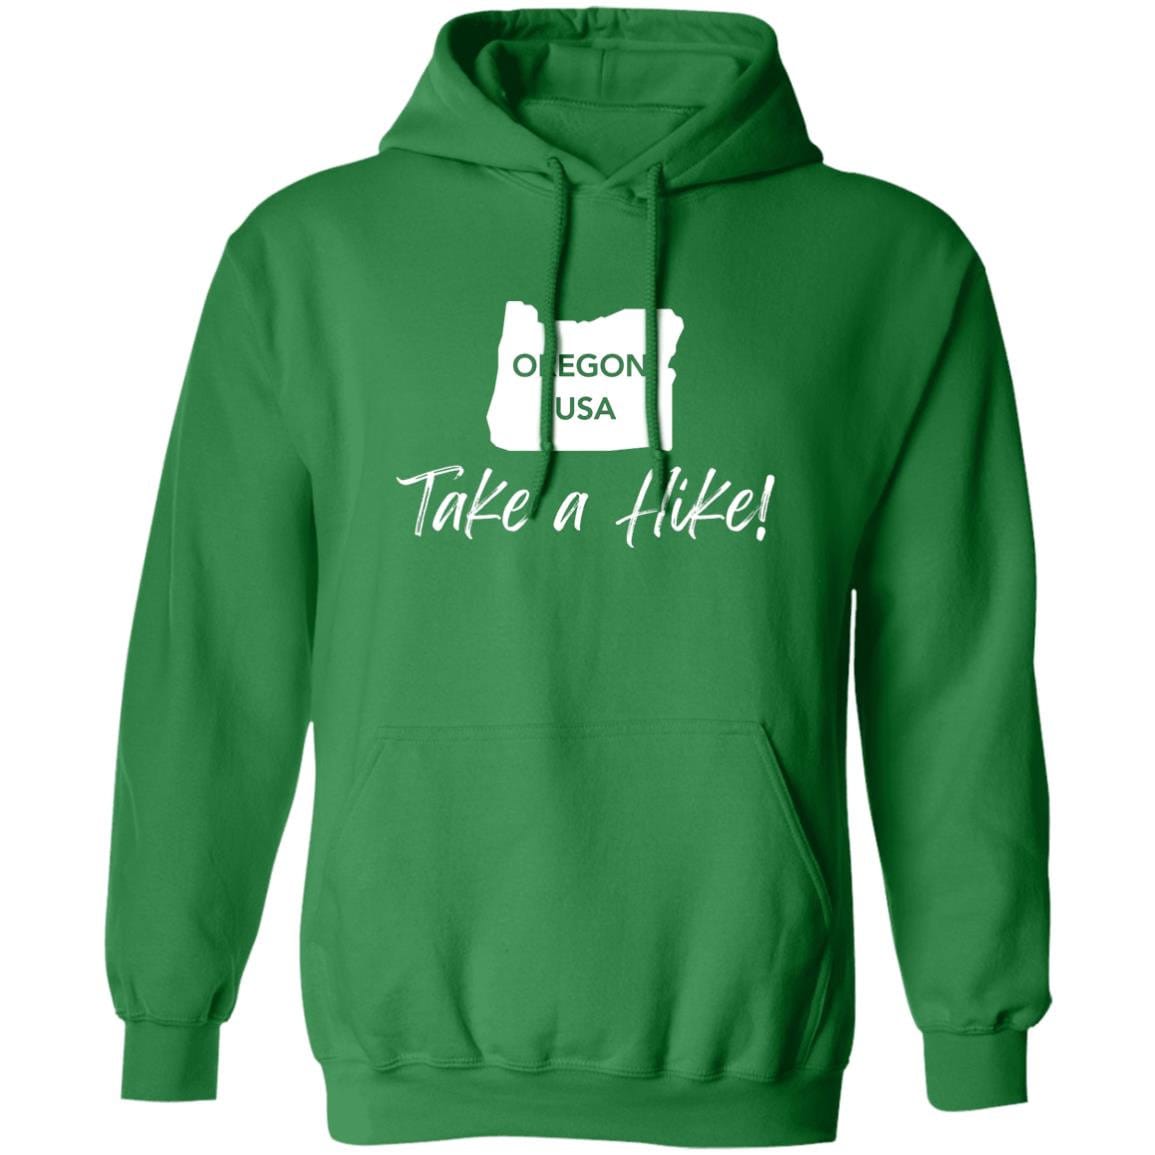 Comfy G185 Pullover Hoodie for men or women - Take a Hike Oregon white print